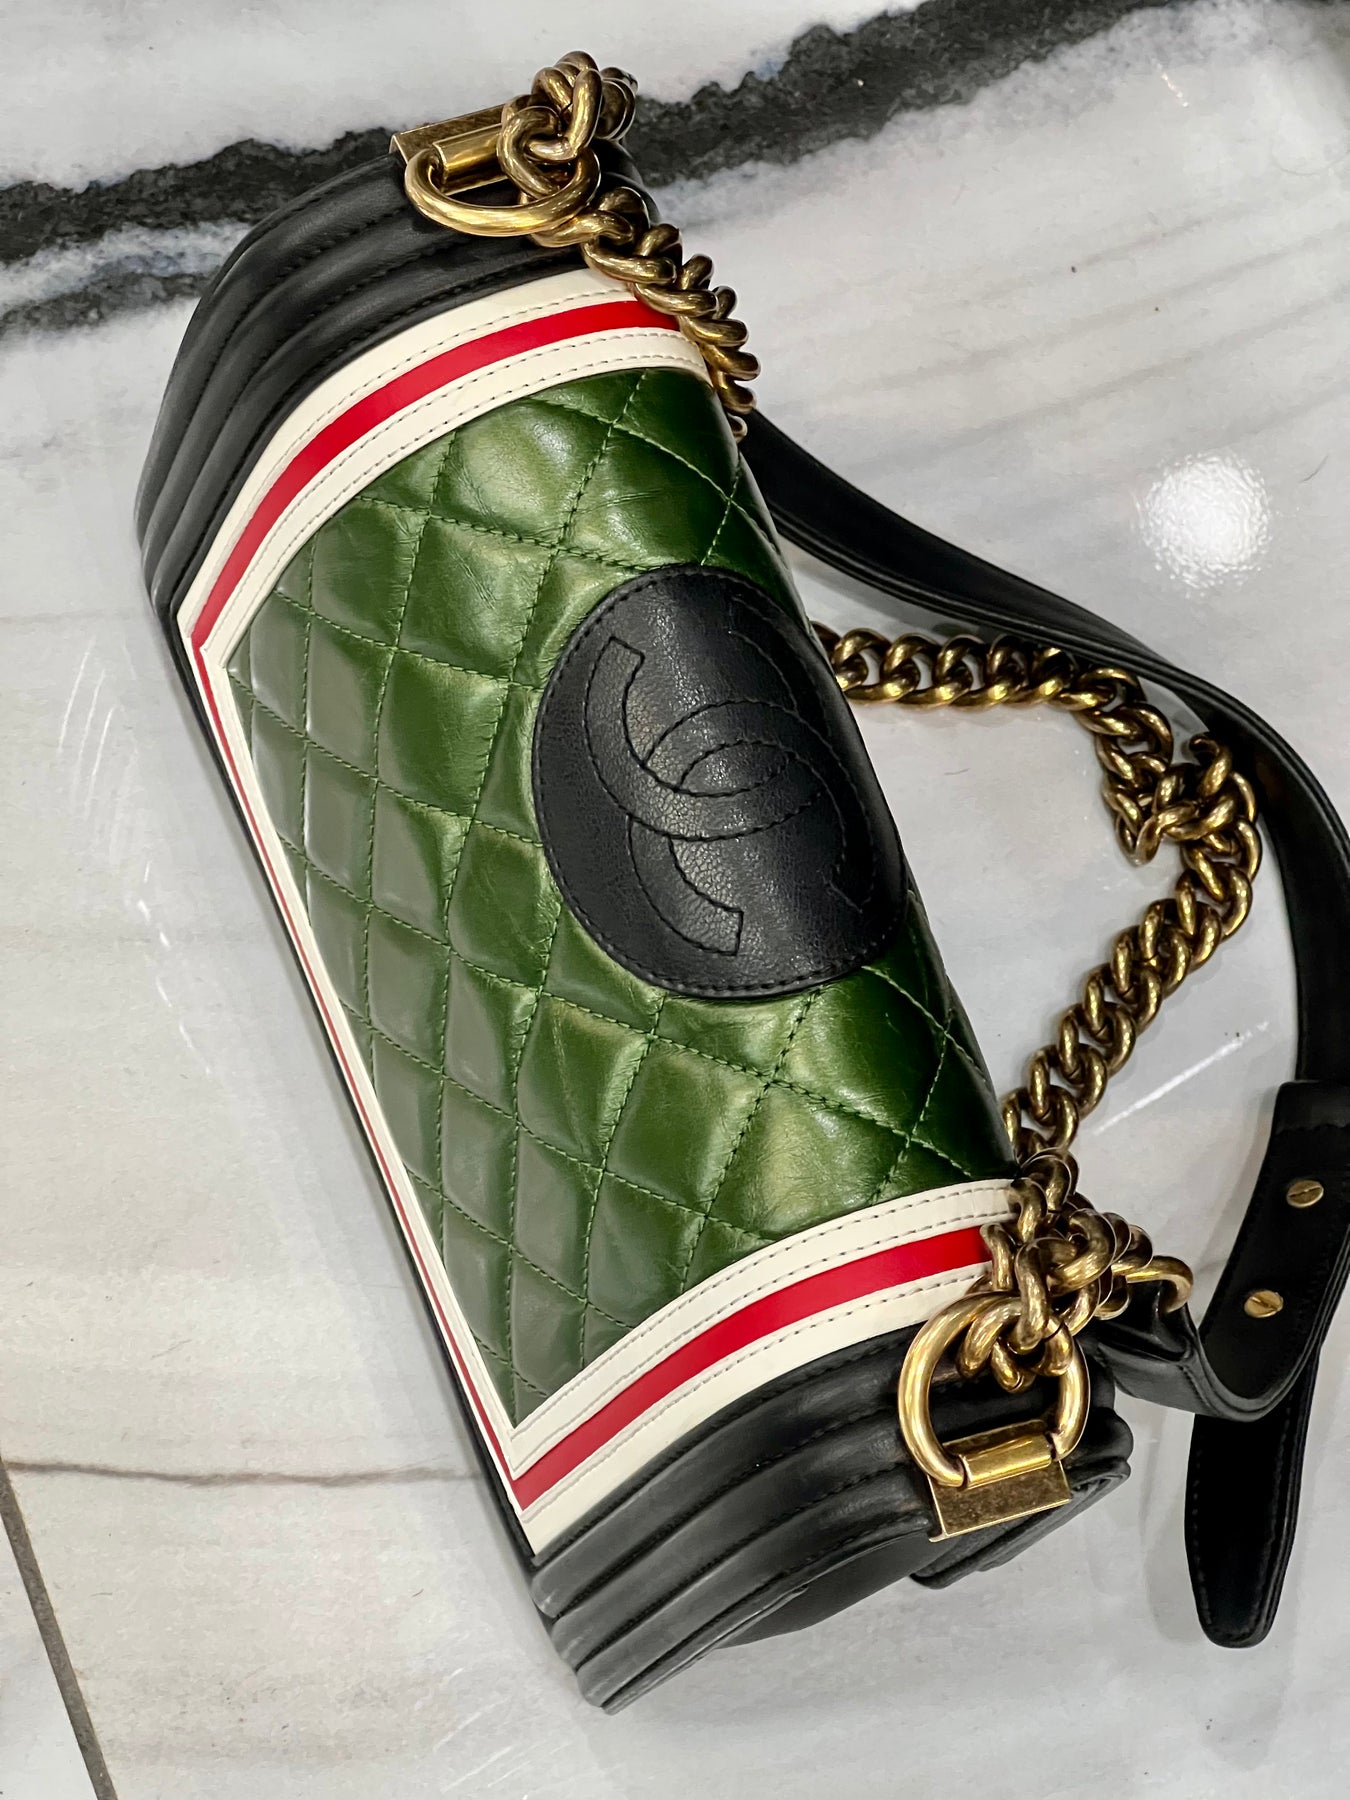 Chanel Bicolor Boy Flap Bag Quilted Lambskin Large at 1stDibs